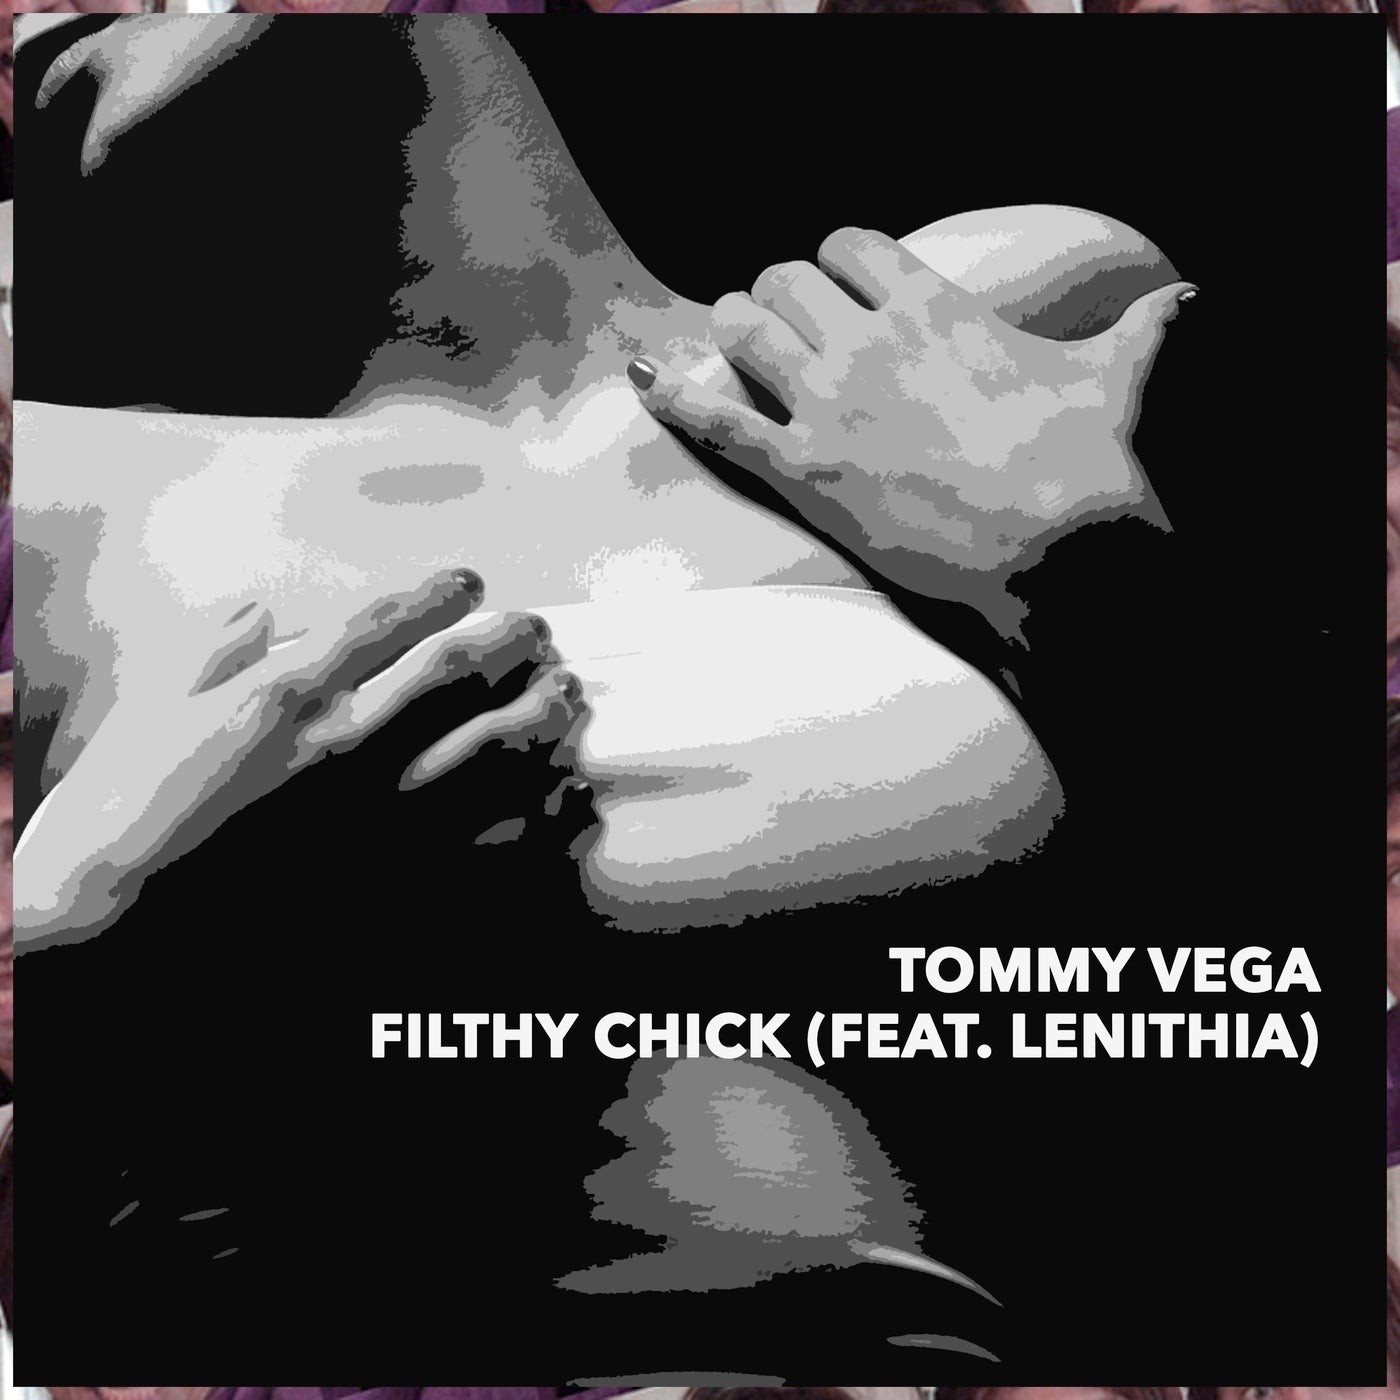 Filthy Chick (feat. Lenithia)